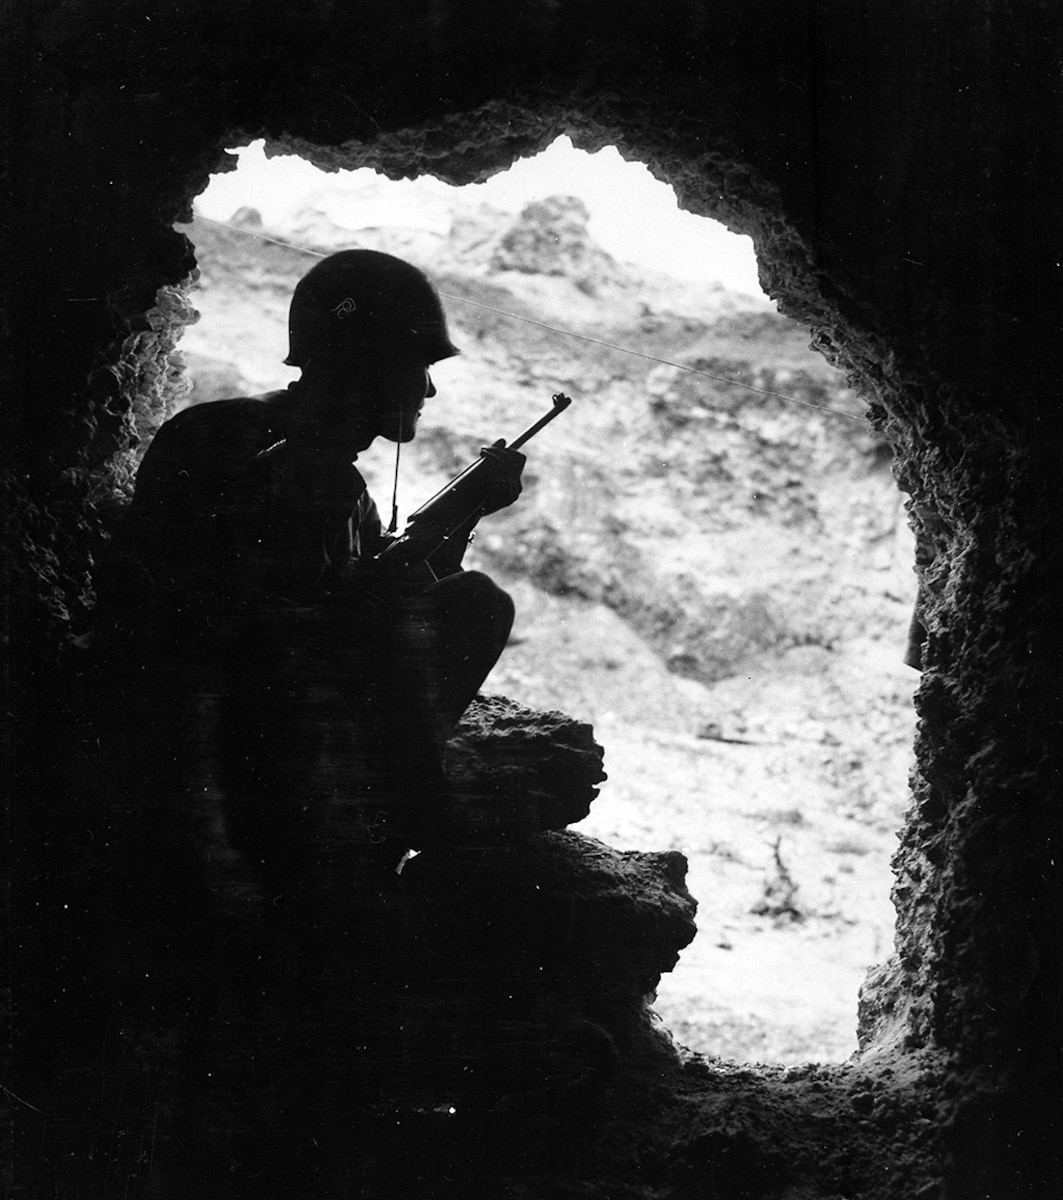 American Marine uses an M1 Carbine to snipe at Japanese positions from an Okinawan cave